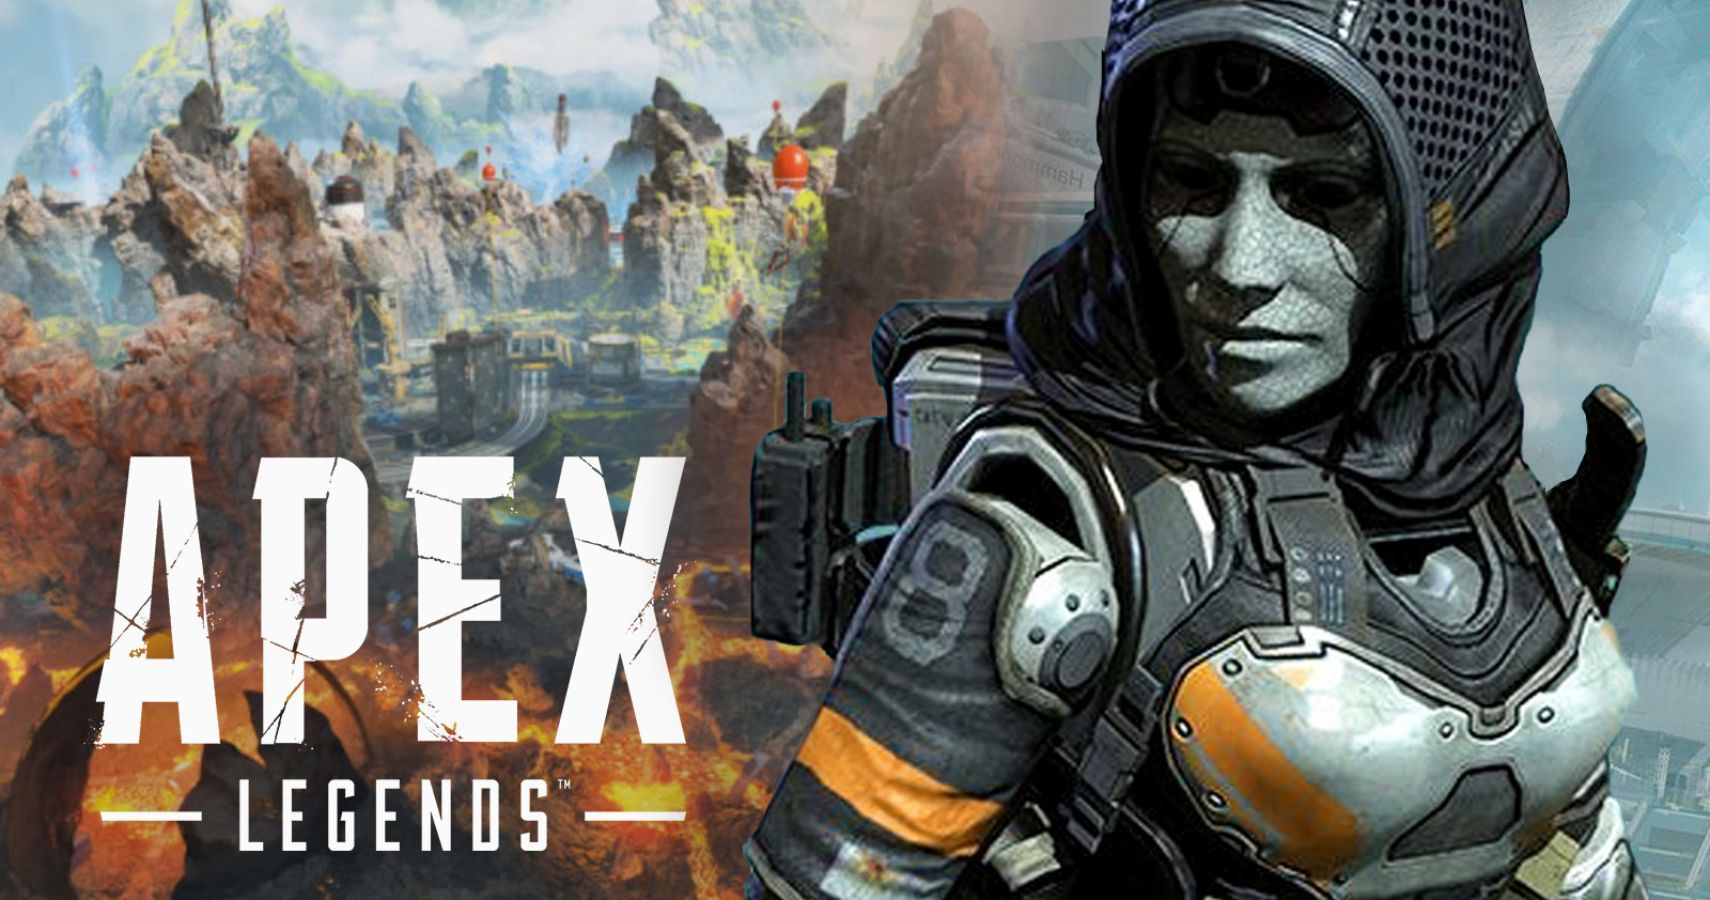 Who Is Ash In Apex Legends And Titanfall What Is The Arena In Season 9